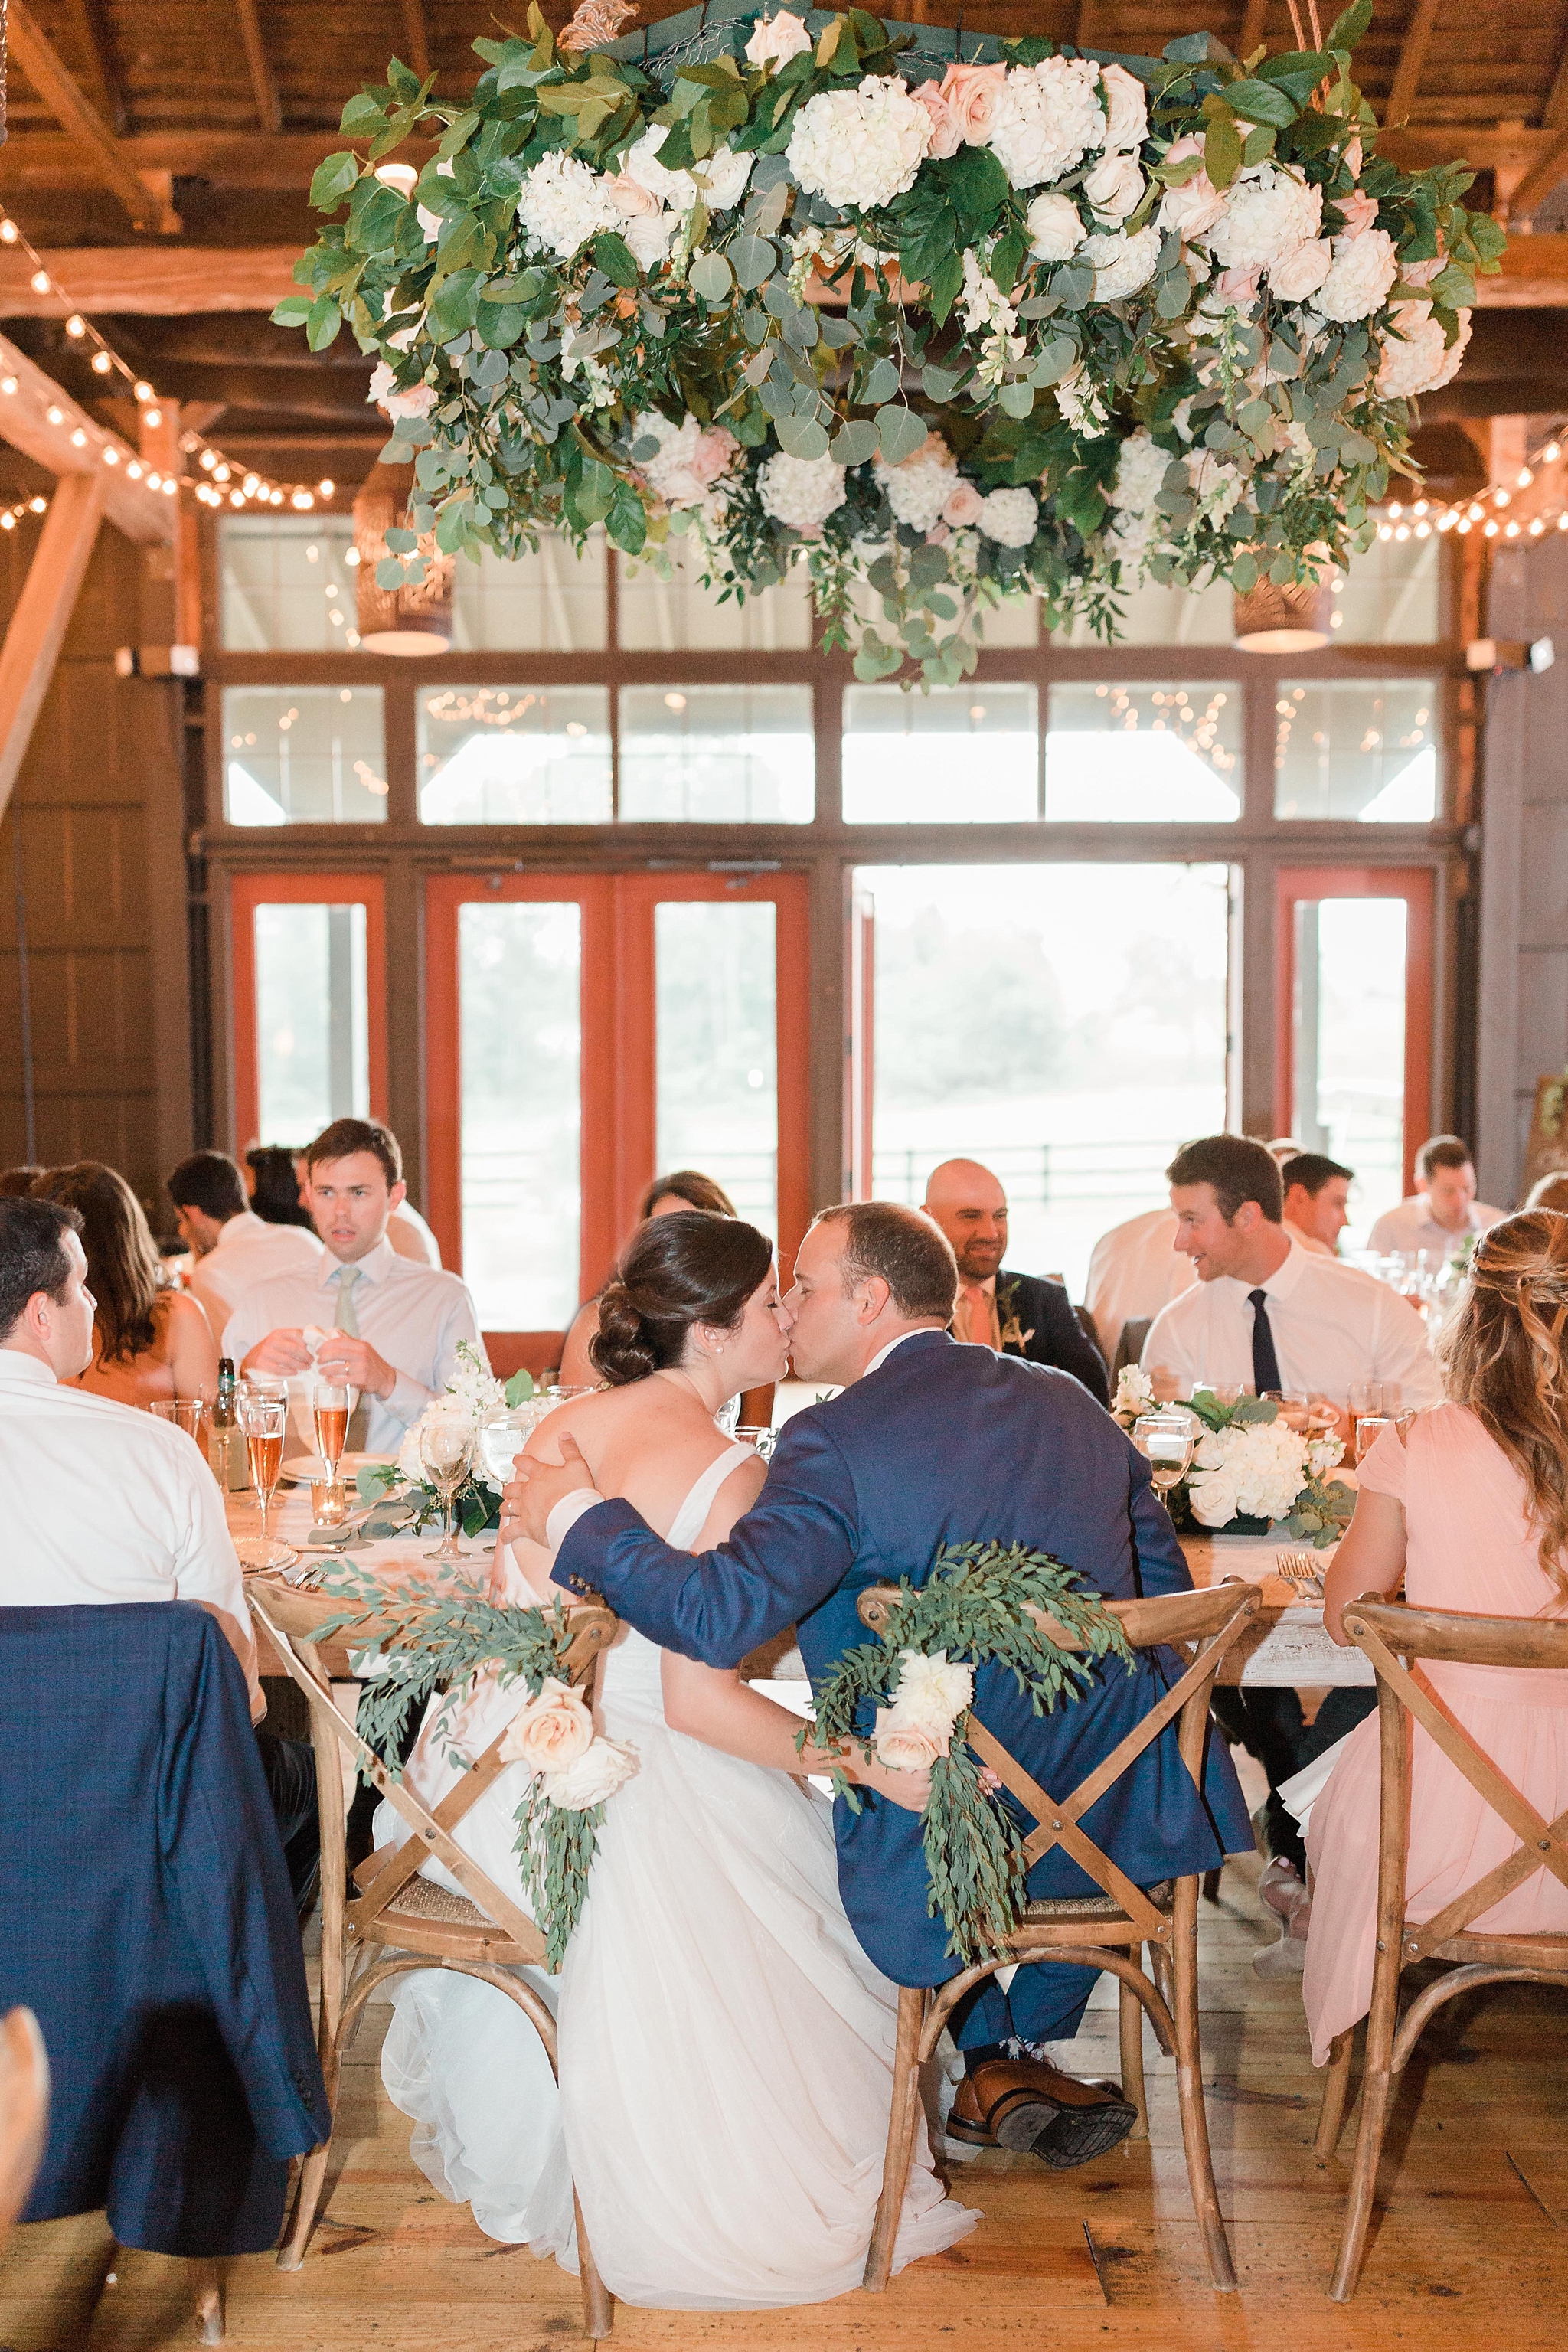 A romantic and chic wedding at Riverside on the Potomac in Leesburg, VA features a neutral palette of creams and greens with a stunning floral chandelier inside the barn!